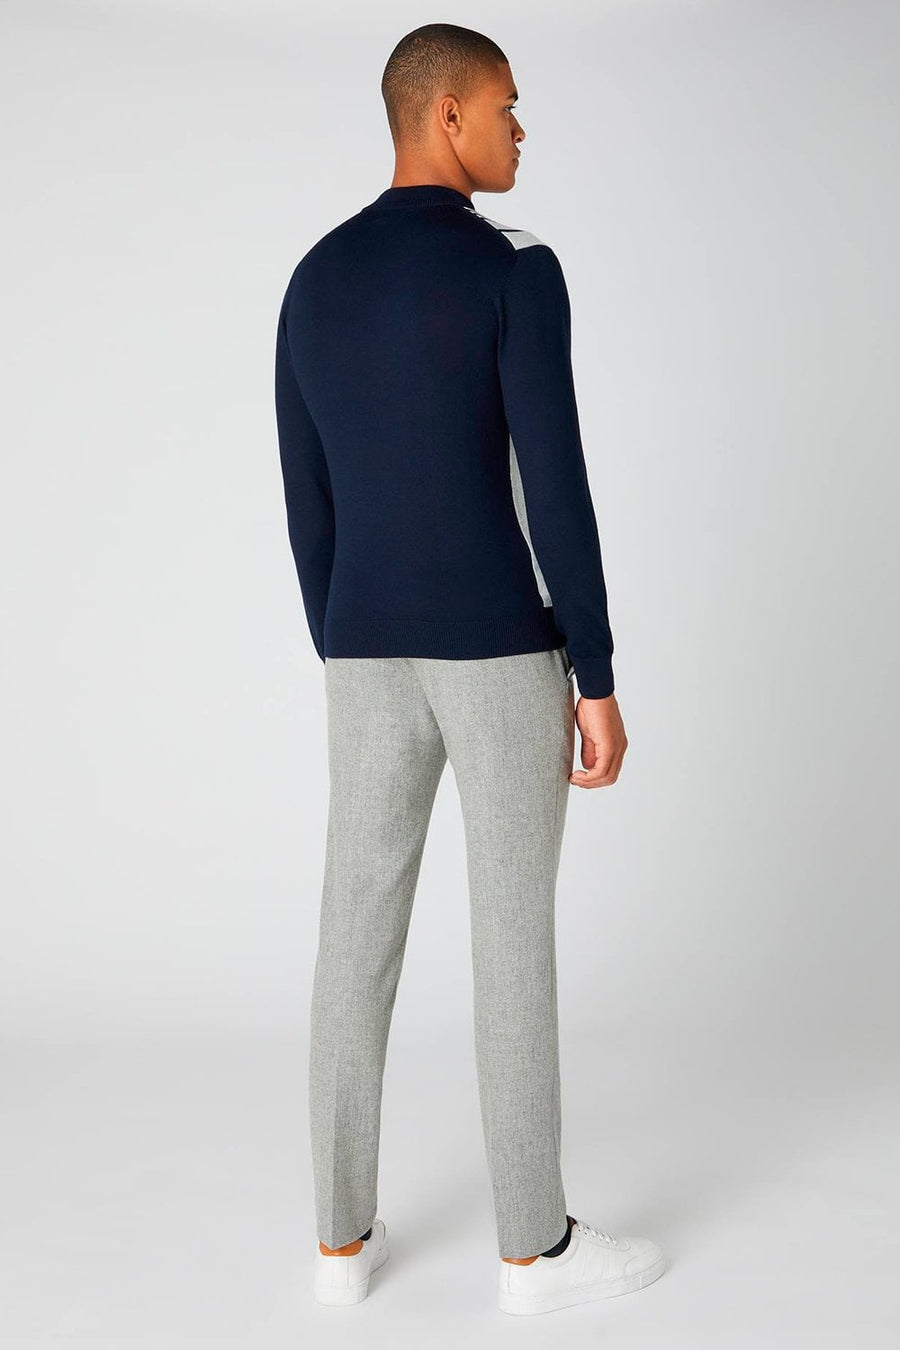 Buy the Remus Uomo 58653 Knitwear in Navy/Grey at Intro. Spend £50 for free UK delivery. Official stockists. We ship worldwide.